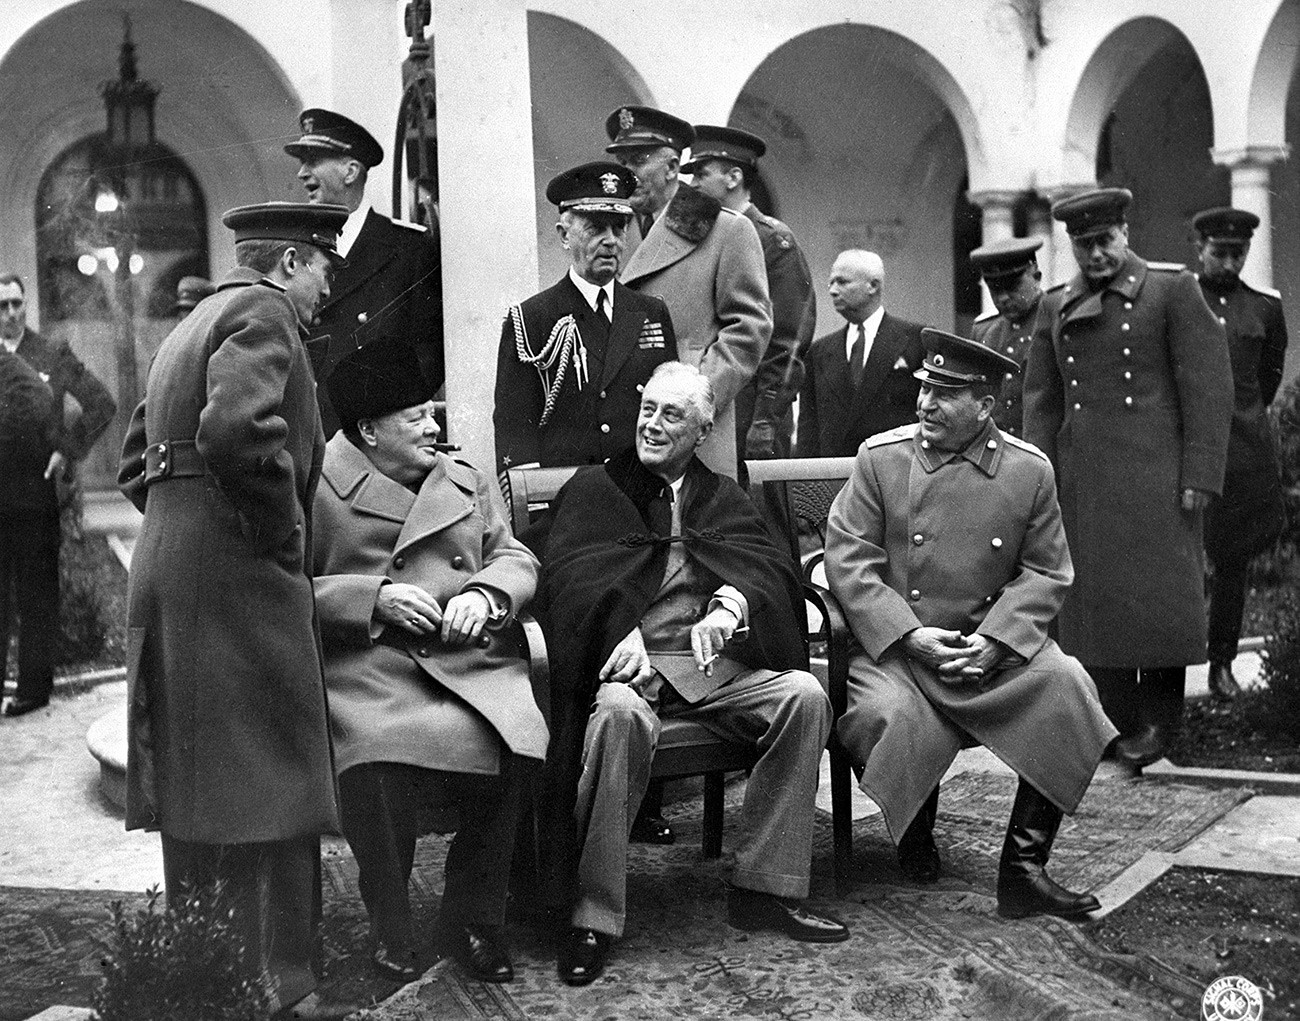 The Yalta (Crimean) conference of three allied powers on February 4-11, 1945. In the center (seating from left to right): British Prime Minister Winston Churchill, US President Franklin Delano Roosevelt and Marshal of the USSR Joseph Stalin.